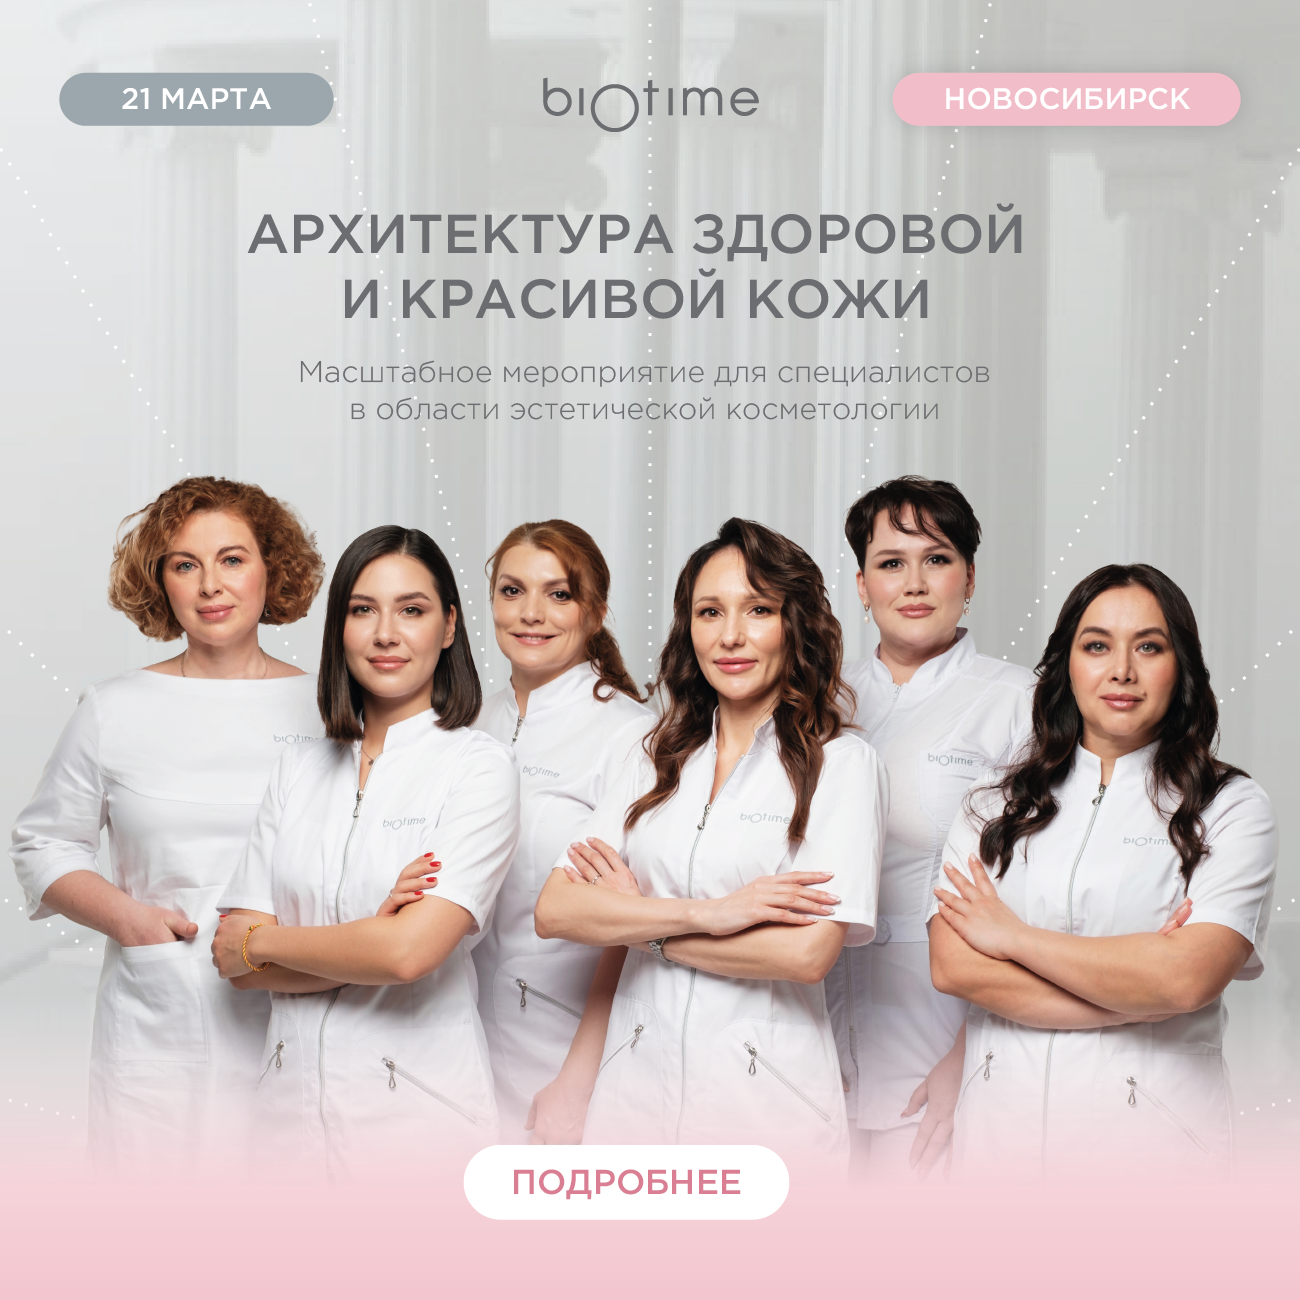 Congress for cosmetologists from Biotime